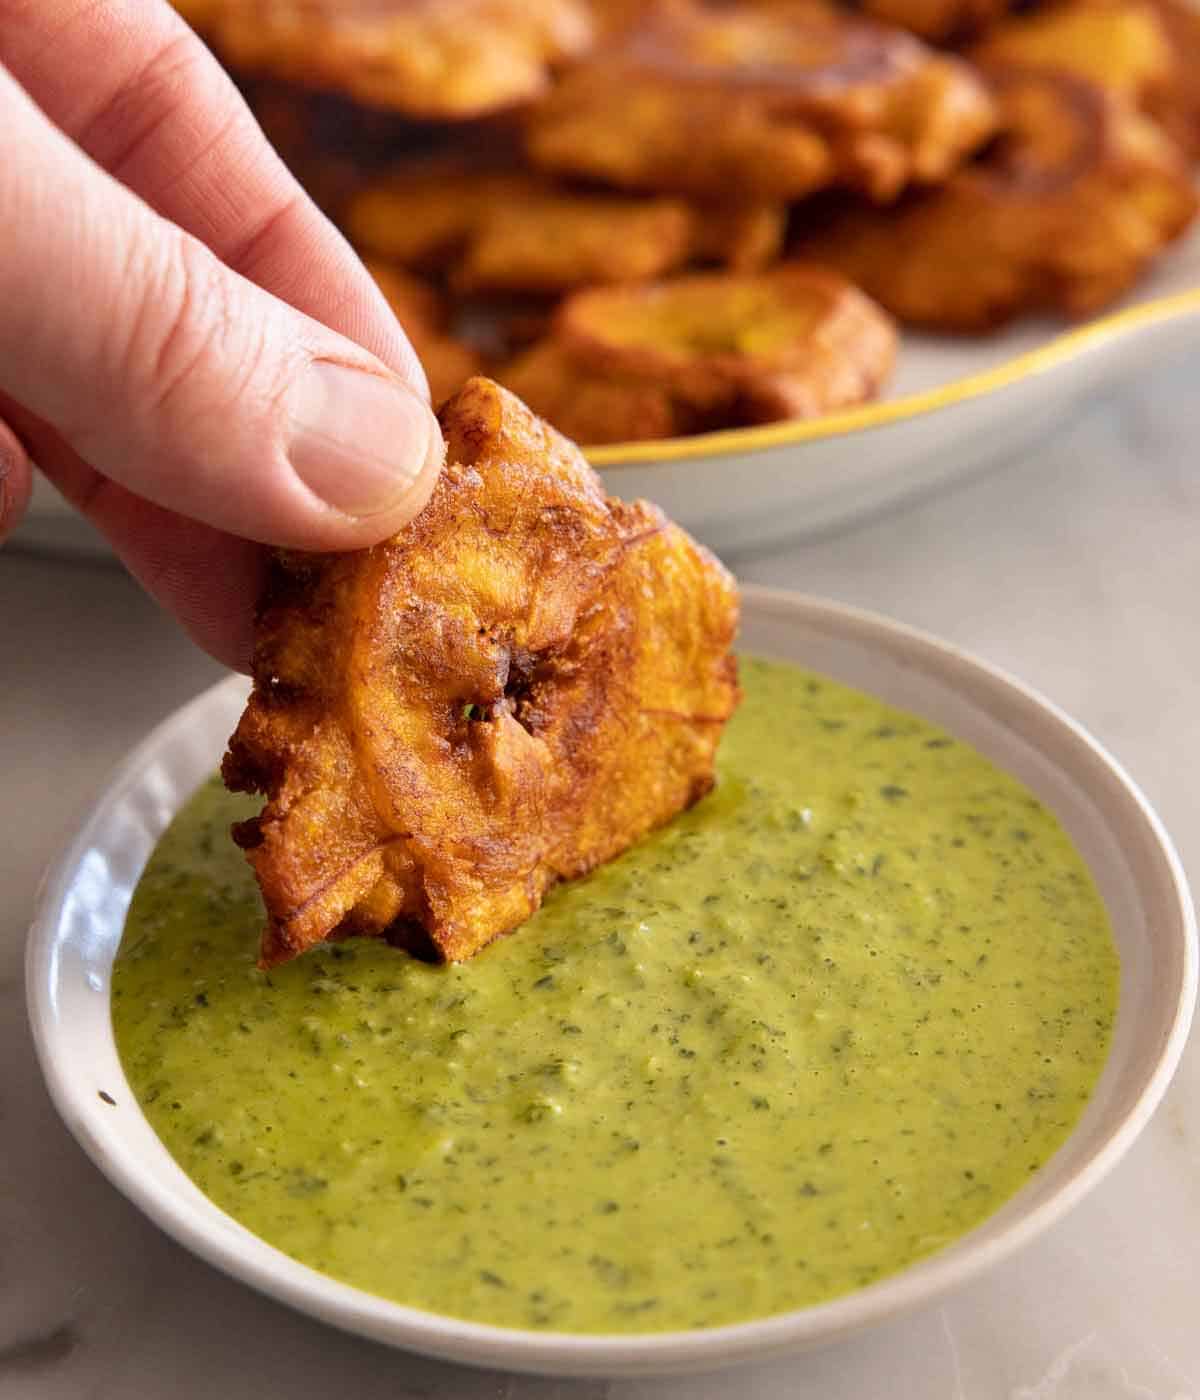 A tostone dipped into a green sauce.